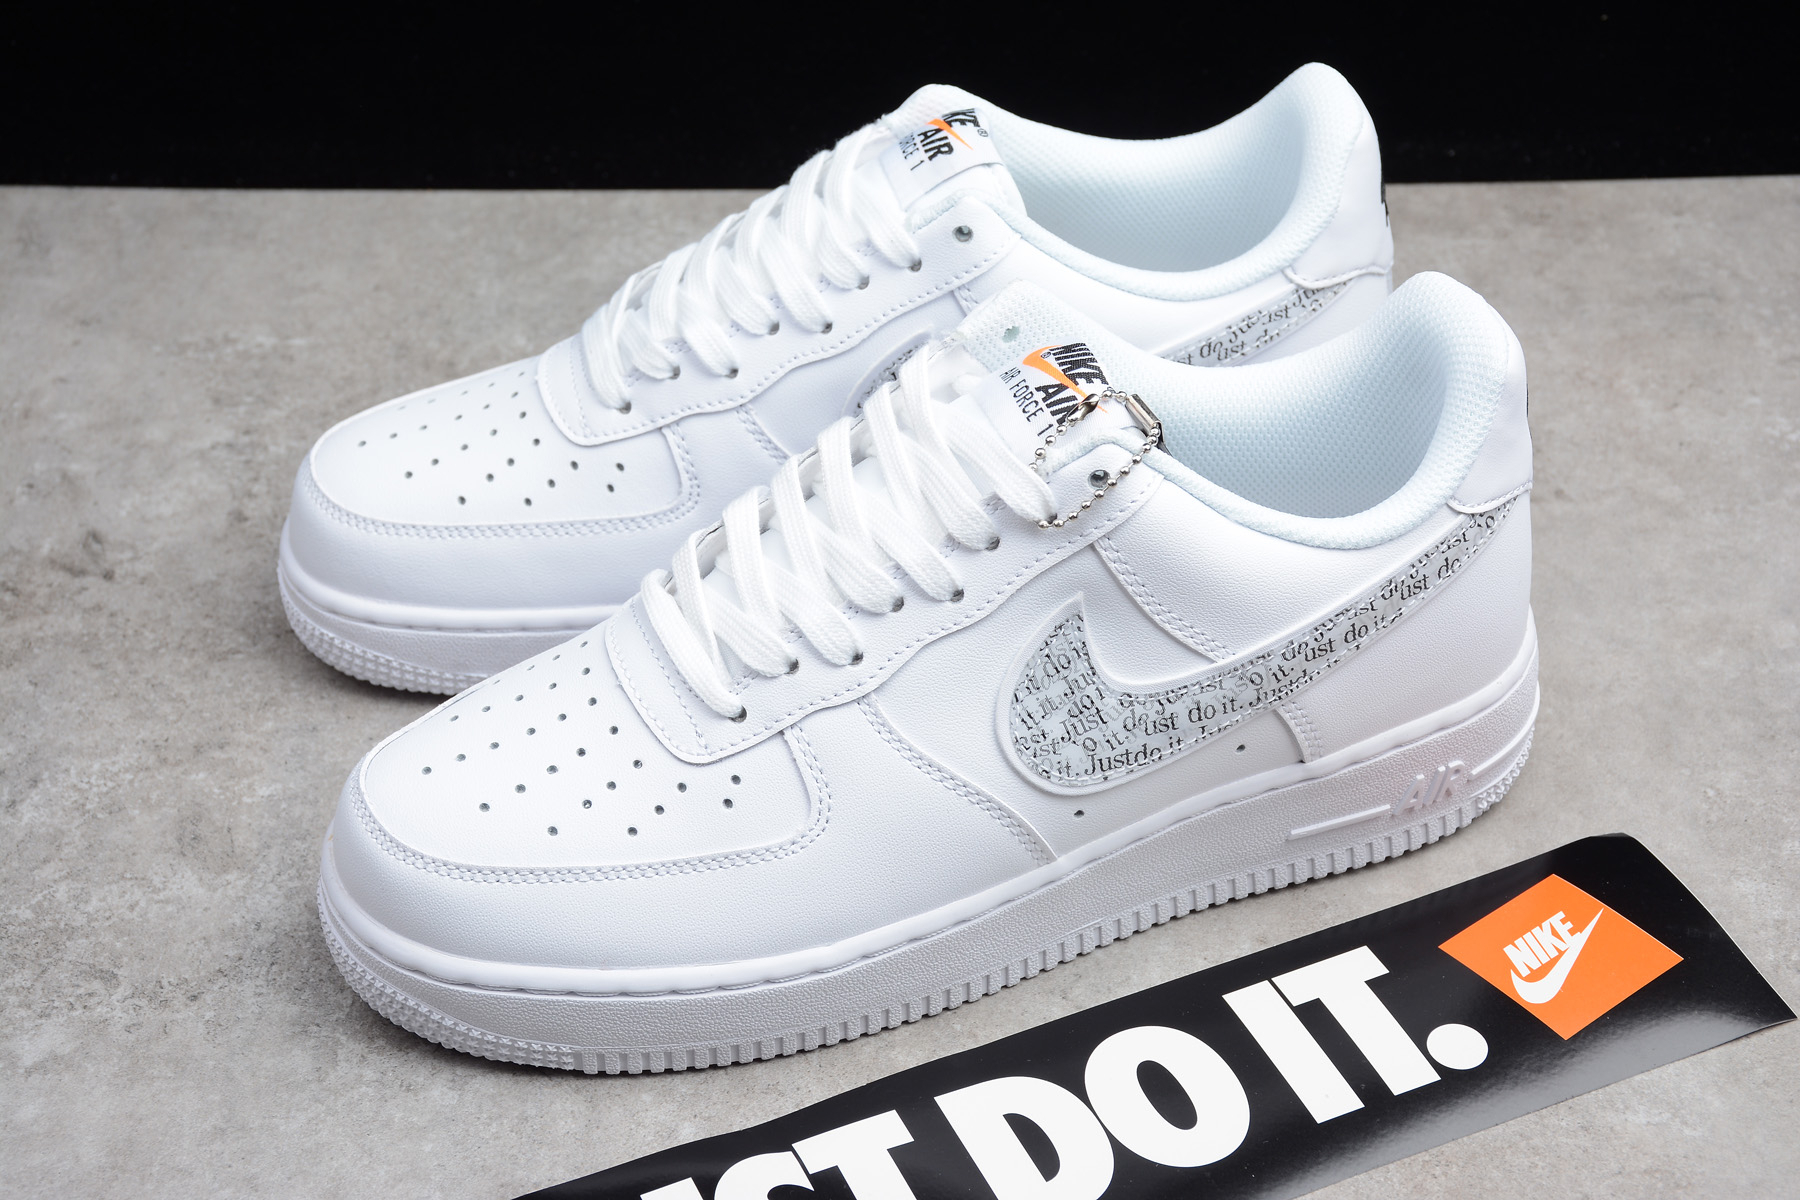 Nike Air Force 1 &quot;Just Do It&quot; Pack White Clear Bq5361-100 pour Coloriage Air Force 1,